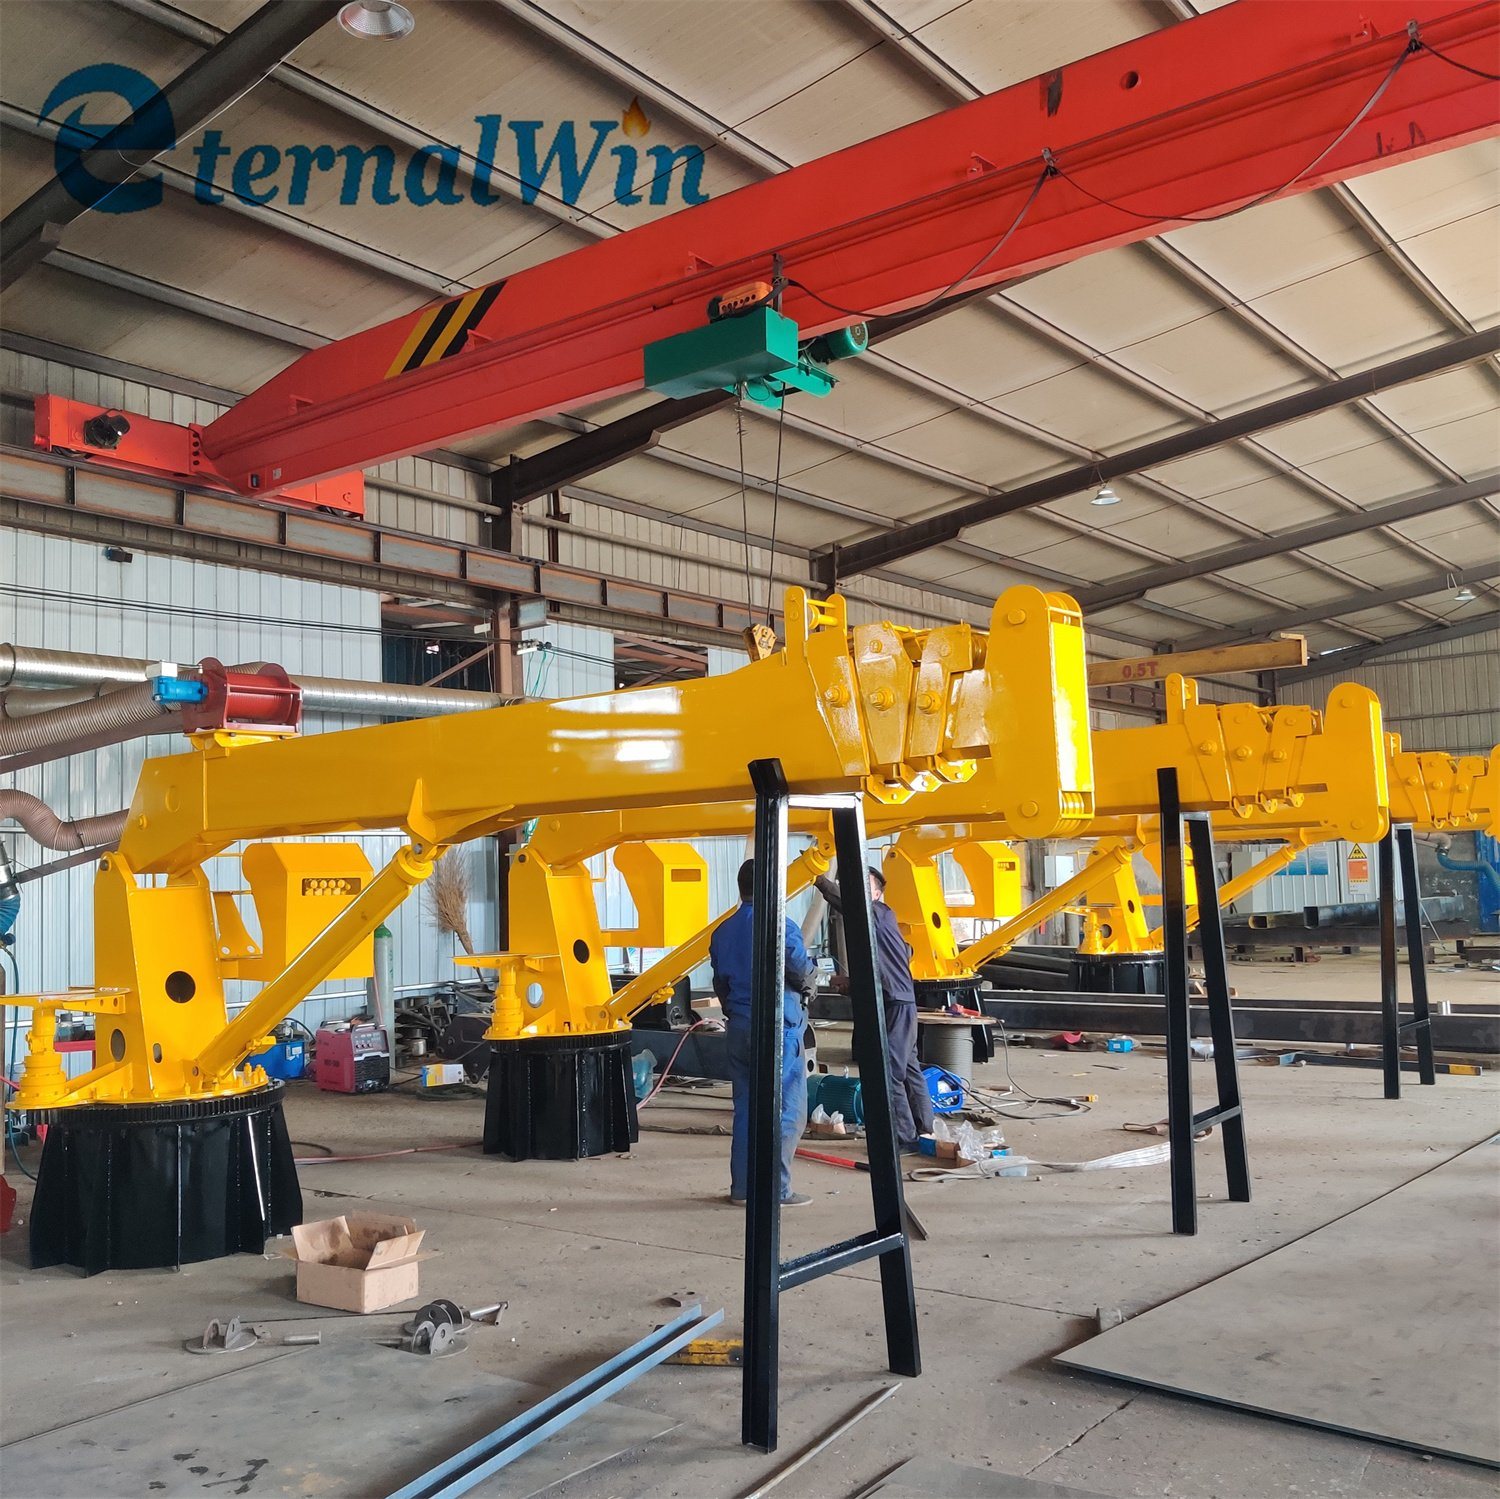 
                Swl 4tx6m Electric Hydraulic Folded Boom Ship Deck Harbor Crane for Sale 10 Ton Marine Cargo Ship Cranes with Diesel Engine for Sale in Indonesia Market
            